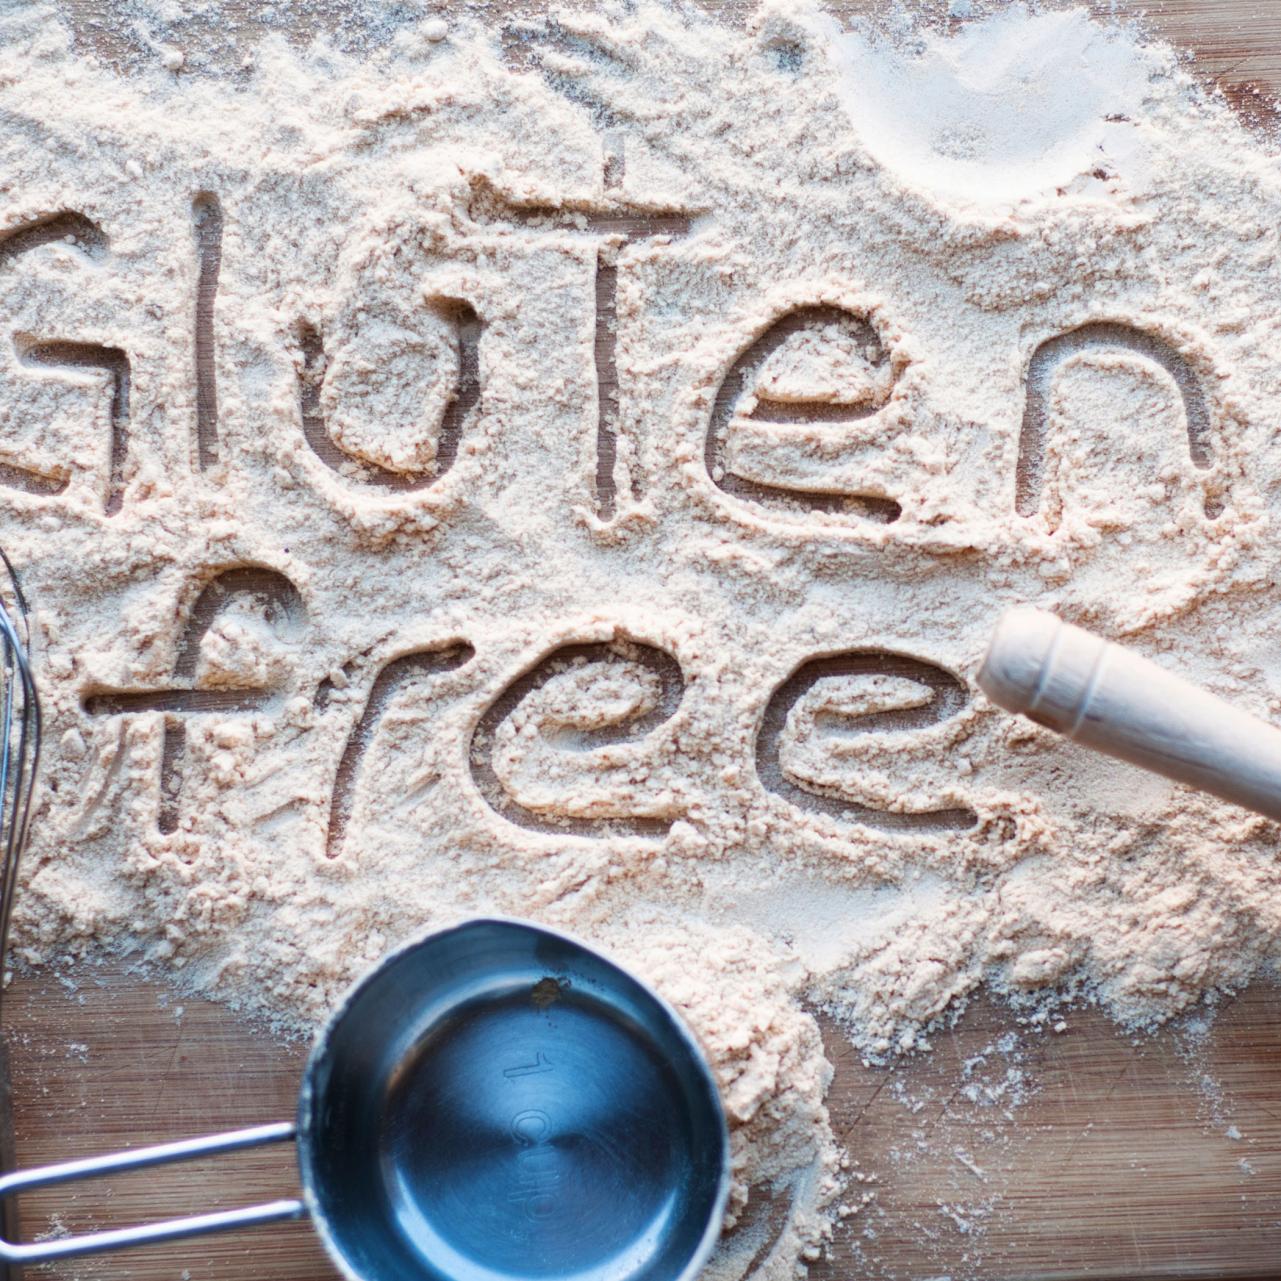 Staying Gluten-Free at the Ice Cream Parlor